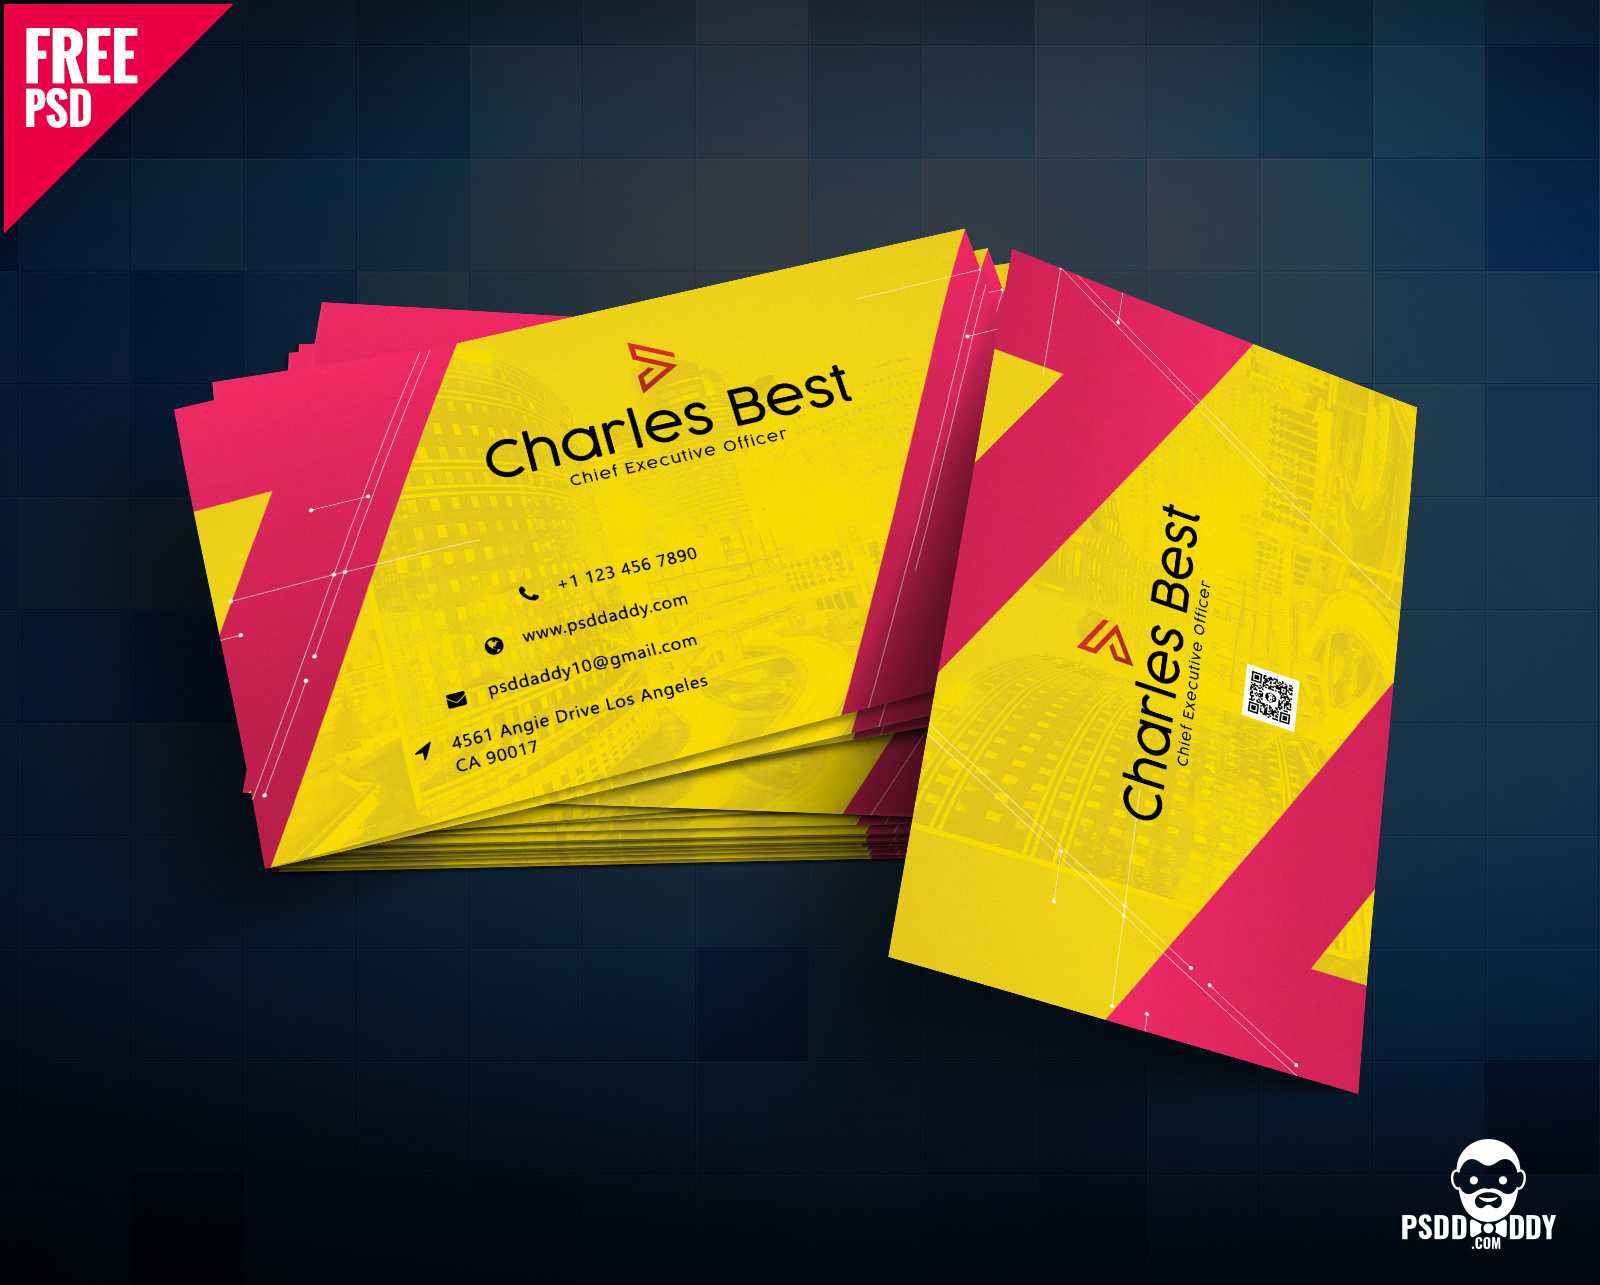 Download] Creative Business Card Free Psd | Psddaddy For Business Card Size Psd Template